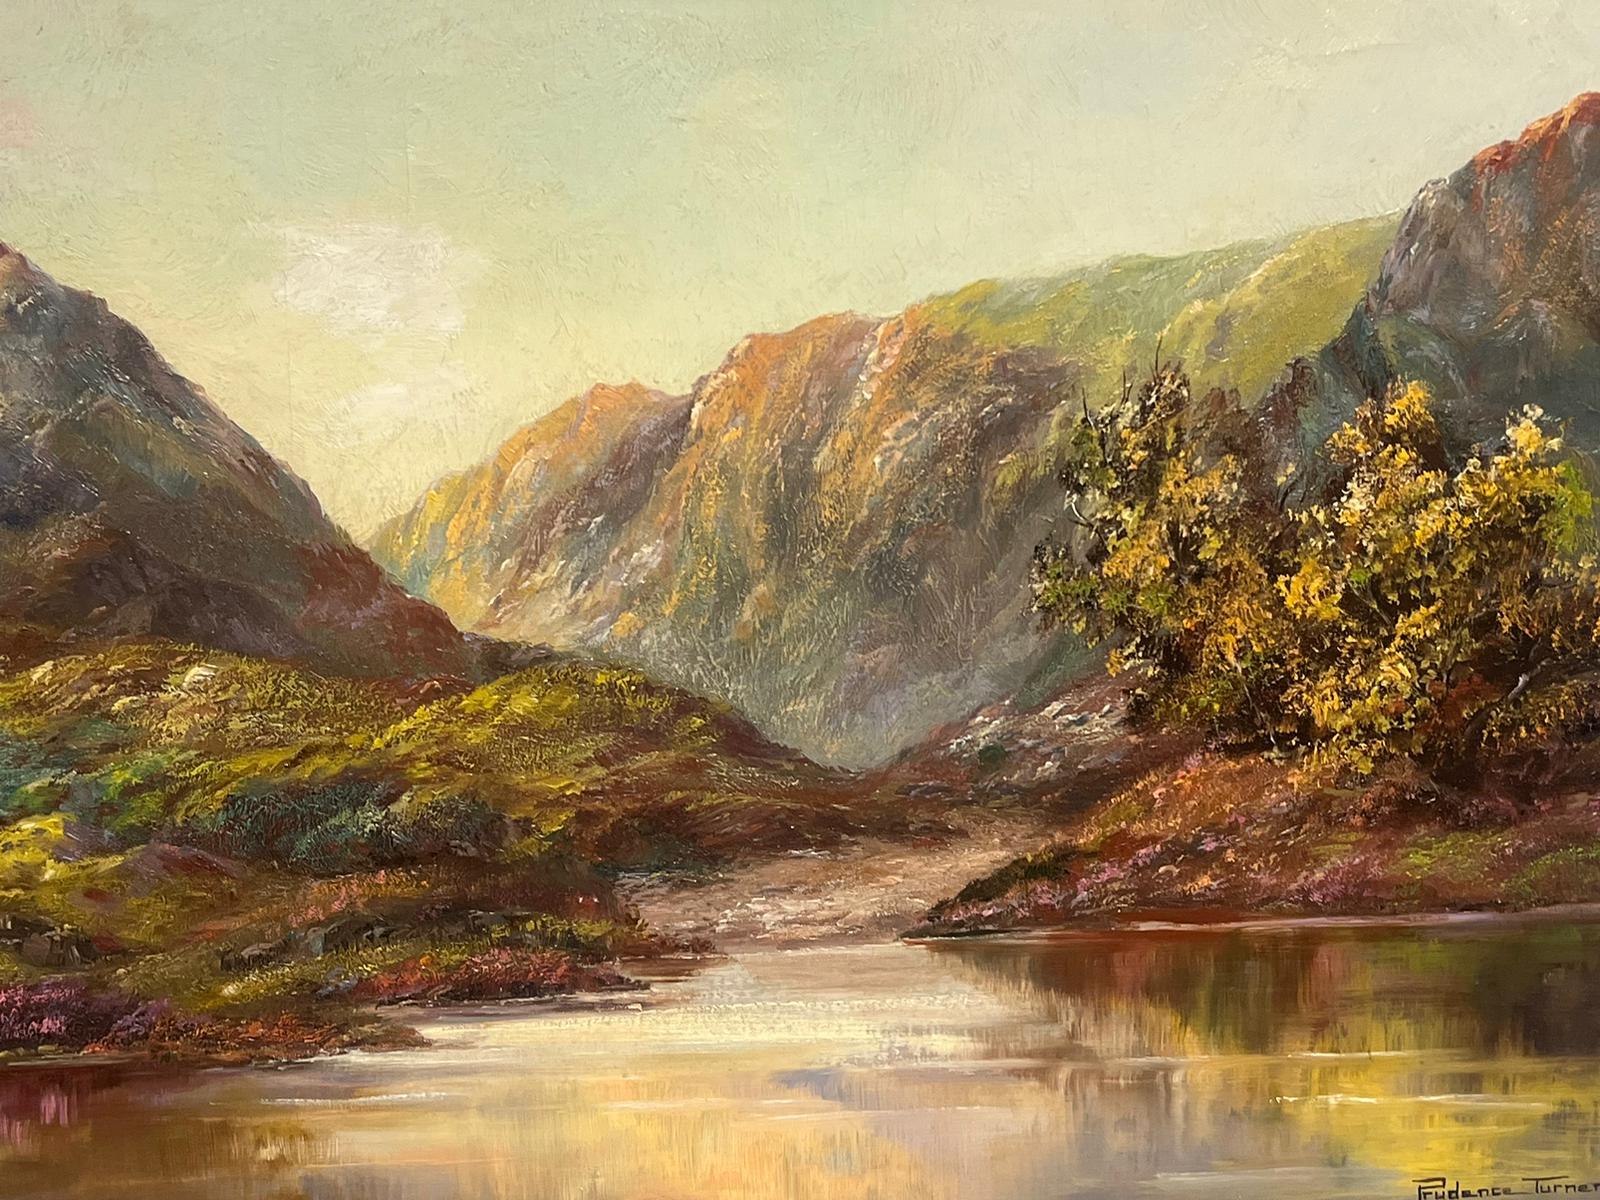 The Highland Loch (Loch Baddagyle)
signed by Prudence Turner, British b. 1930, signed. 
oil painting on canvas, framed.
framed: 23 x 43 inches
canvas:  20 x 40 inches

Provenance: private collection, England. 

Condition: The painting is in